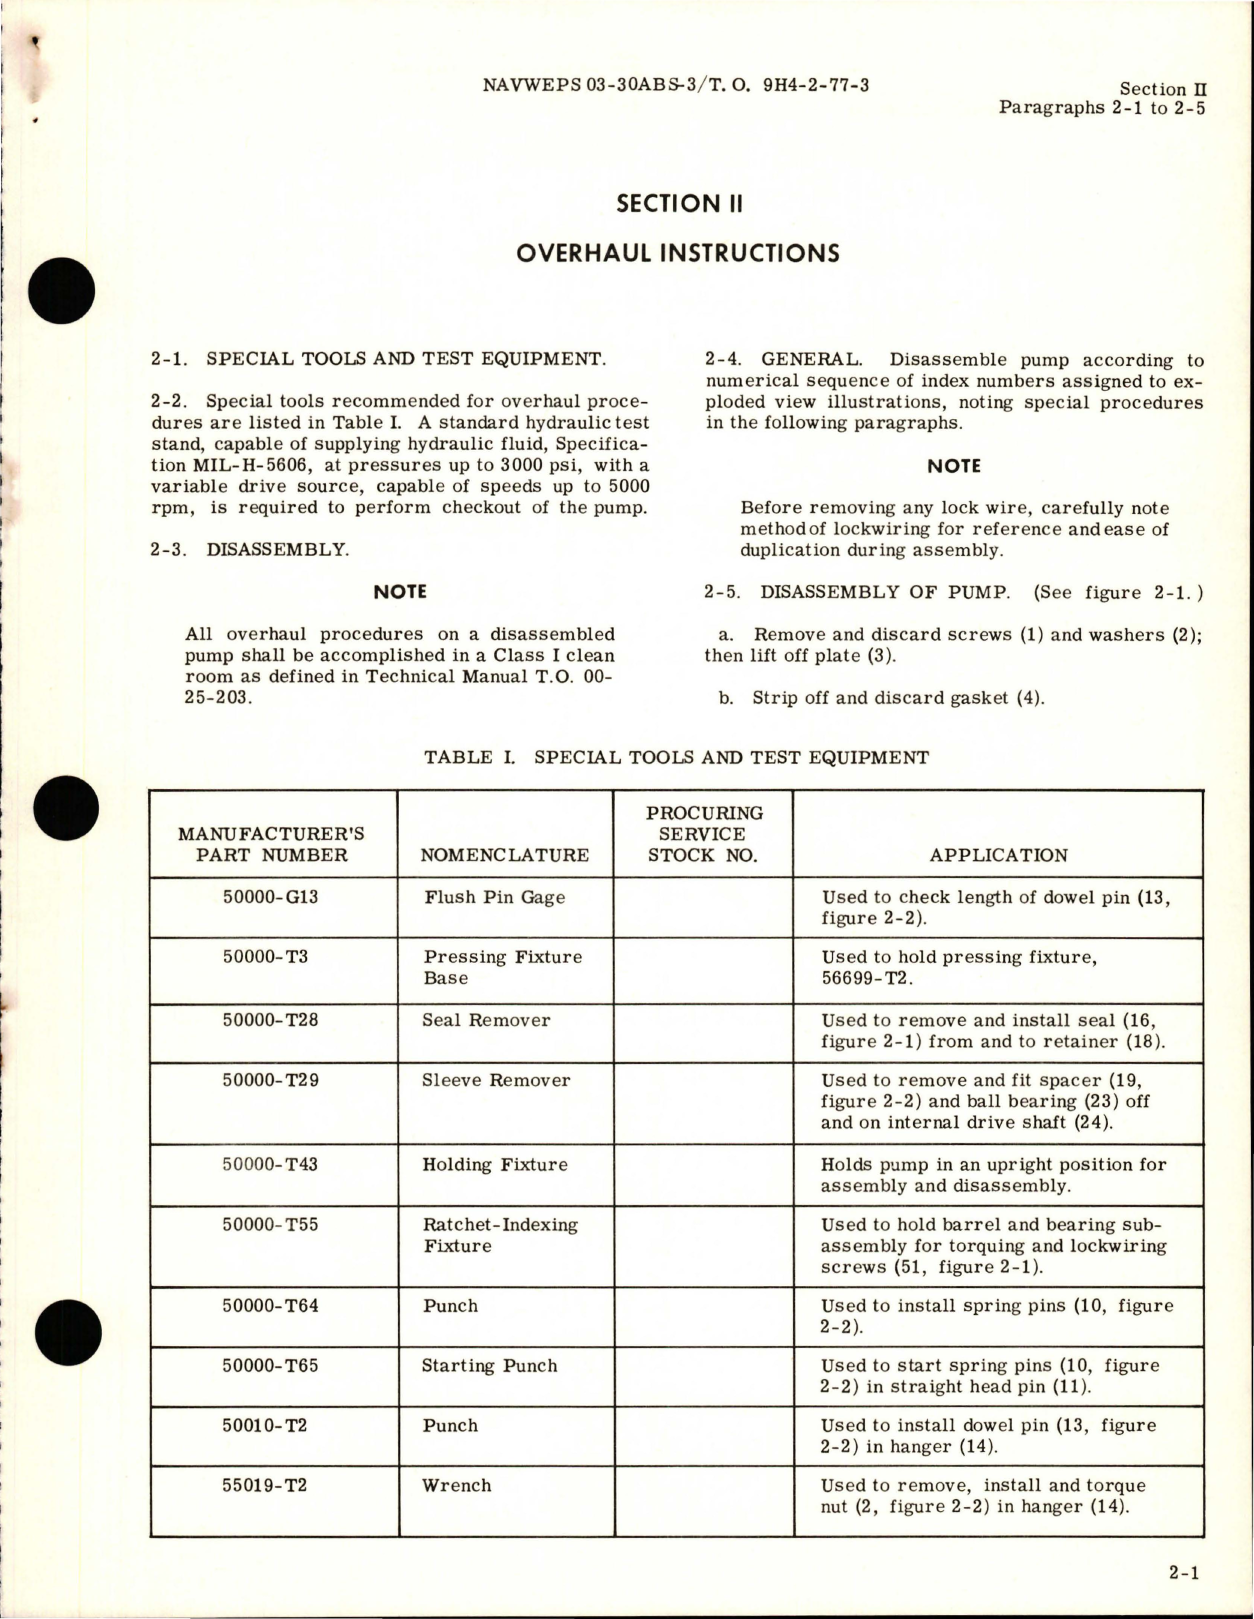 Sample page 7 from AirCorps Library document: Overhaul Instructions for Variable Displacement Aircraft Pump - Part 55001 - Model AP10V-2